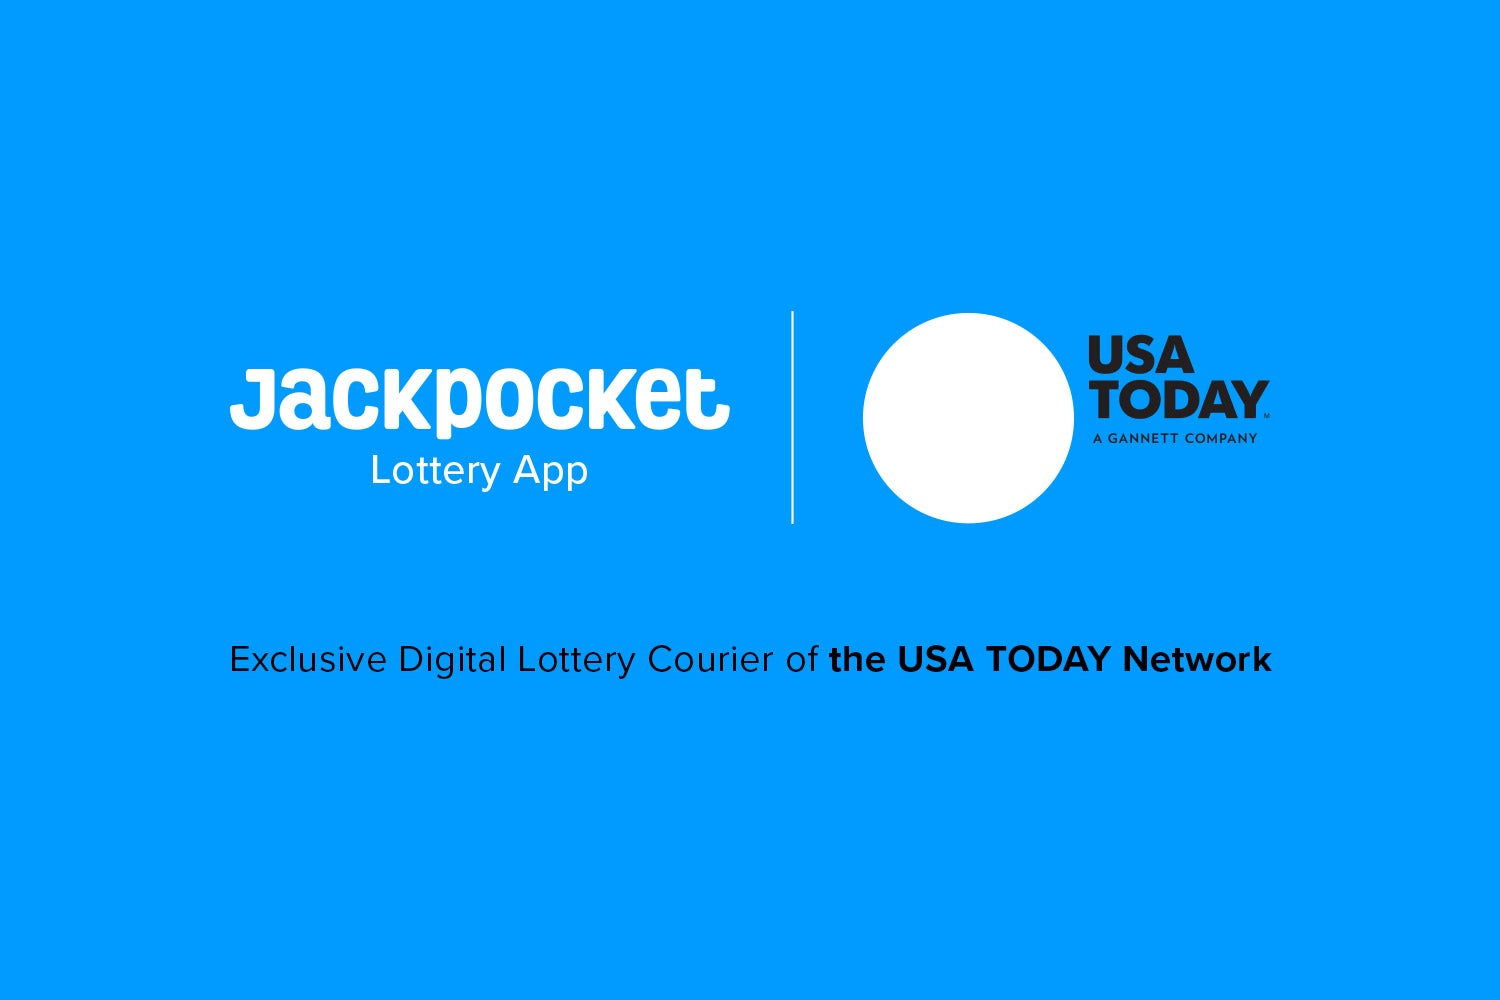 Jackpocket is the Official Digital Lottery Courier of the USA TODAY Network